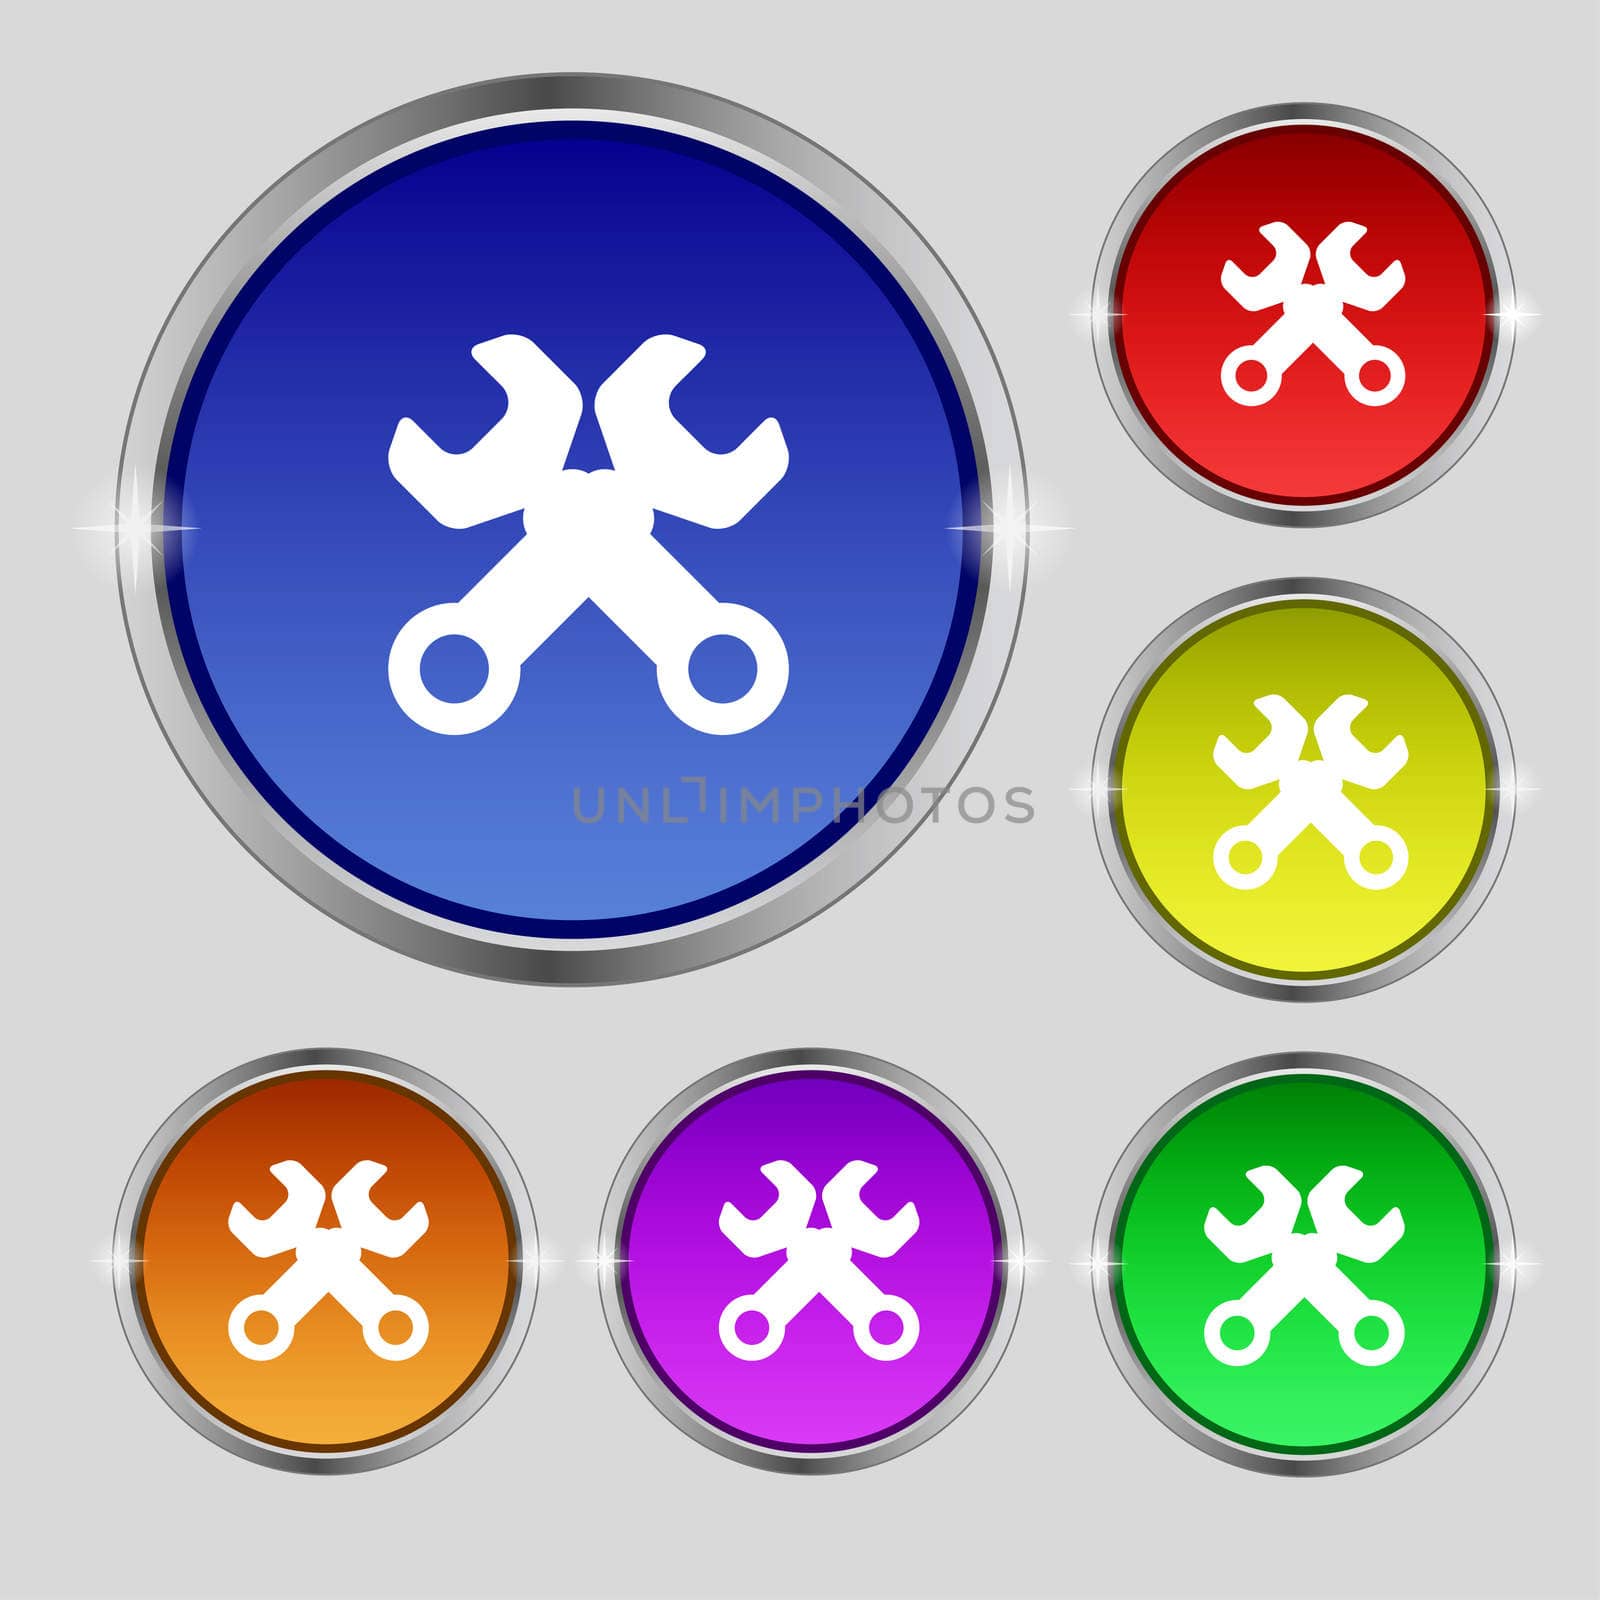 Wrench key sign icon. Service tool symbol. Set colourful buttons. illustration